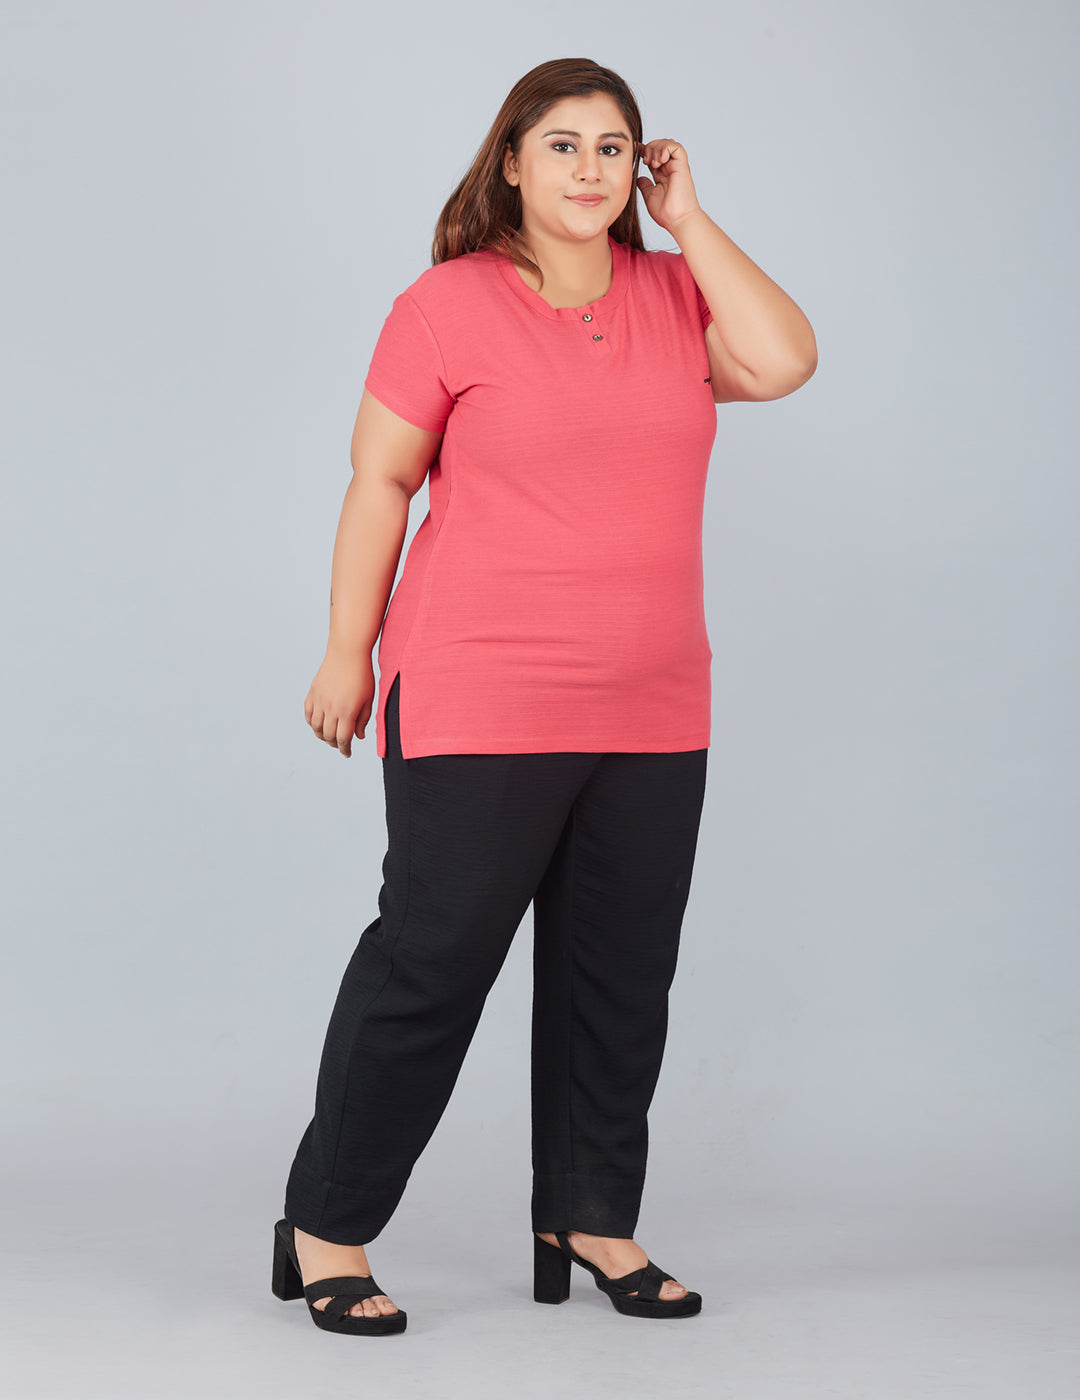 Plus Size Cotton T-shirts For Summer - Pink At Best Prices